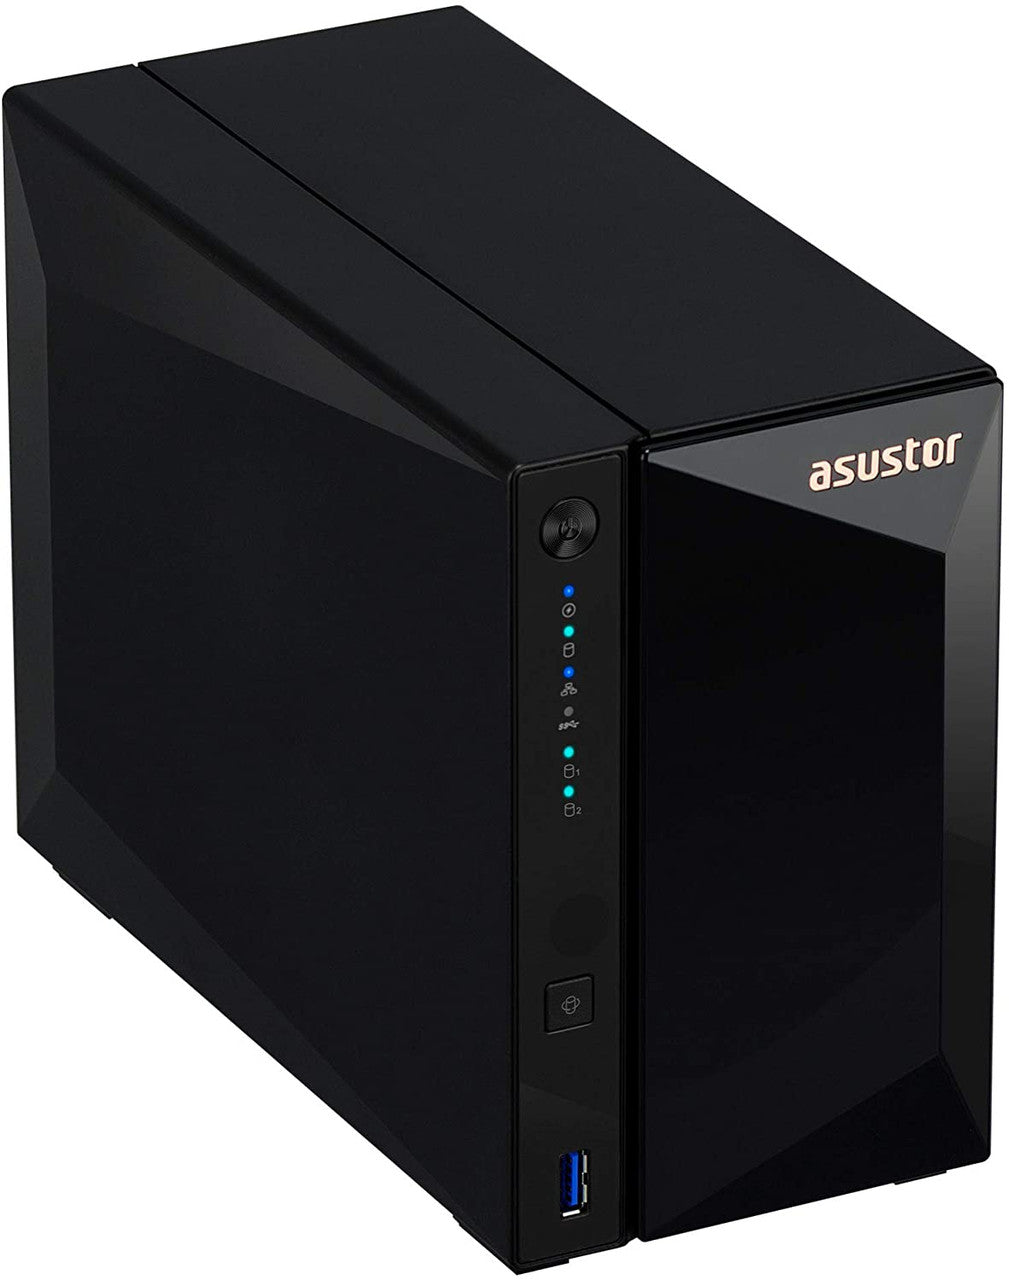 Asustor AS3302T 2-Bay Drivestor 2 PRO NAS with 2GB RAM and 6TB (2x3TB) Seagate Ironwolf NAS Drives Fully Assembled and Tested